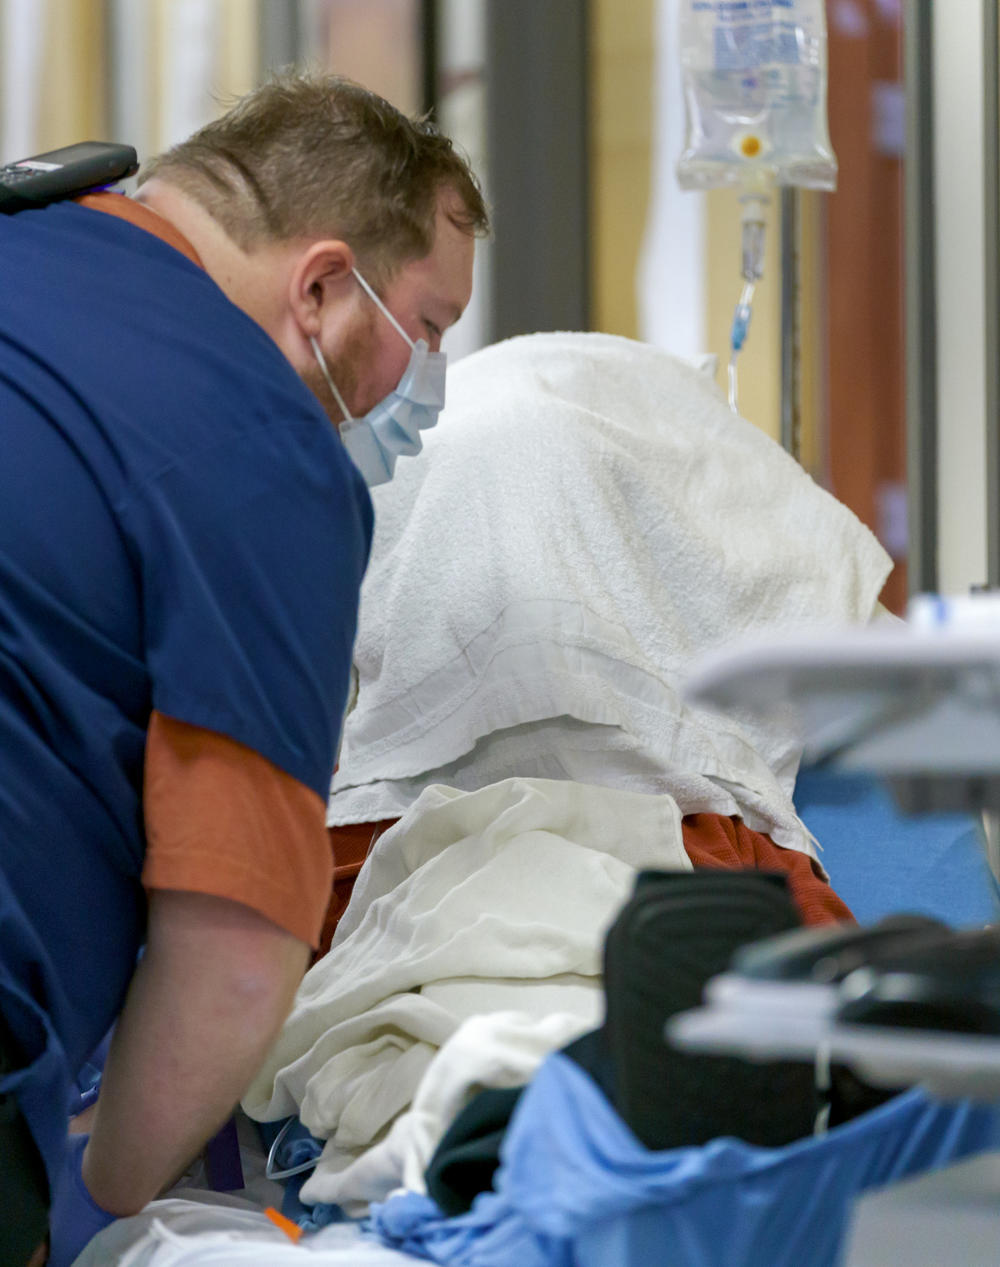 A patient covers his head with a towel while receiving fluids in the hallway of the emergency department.